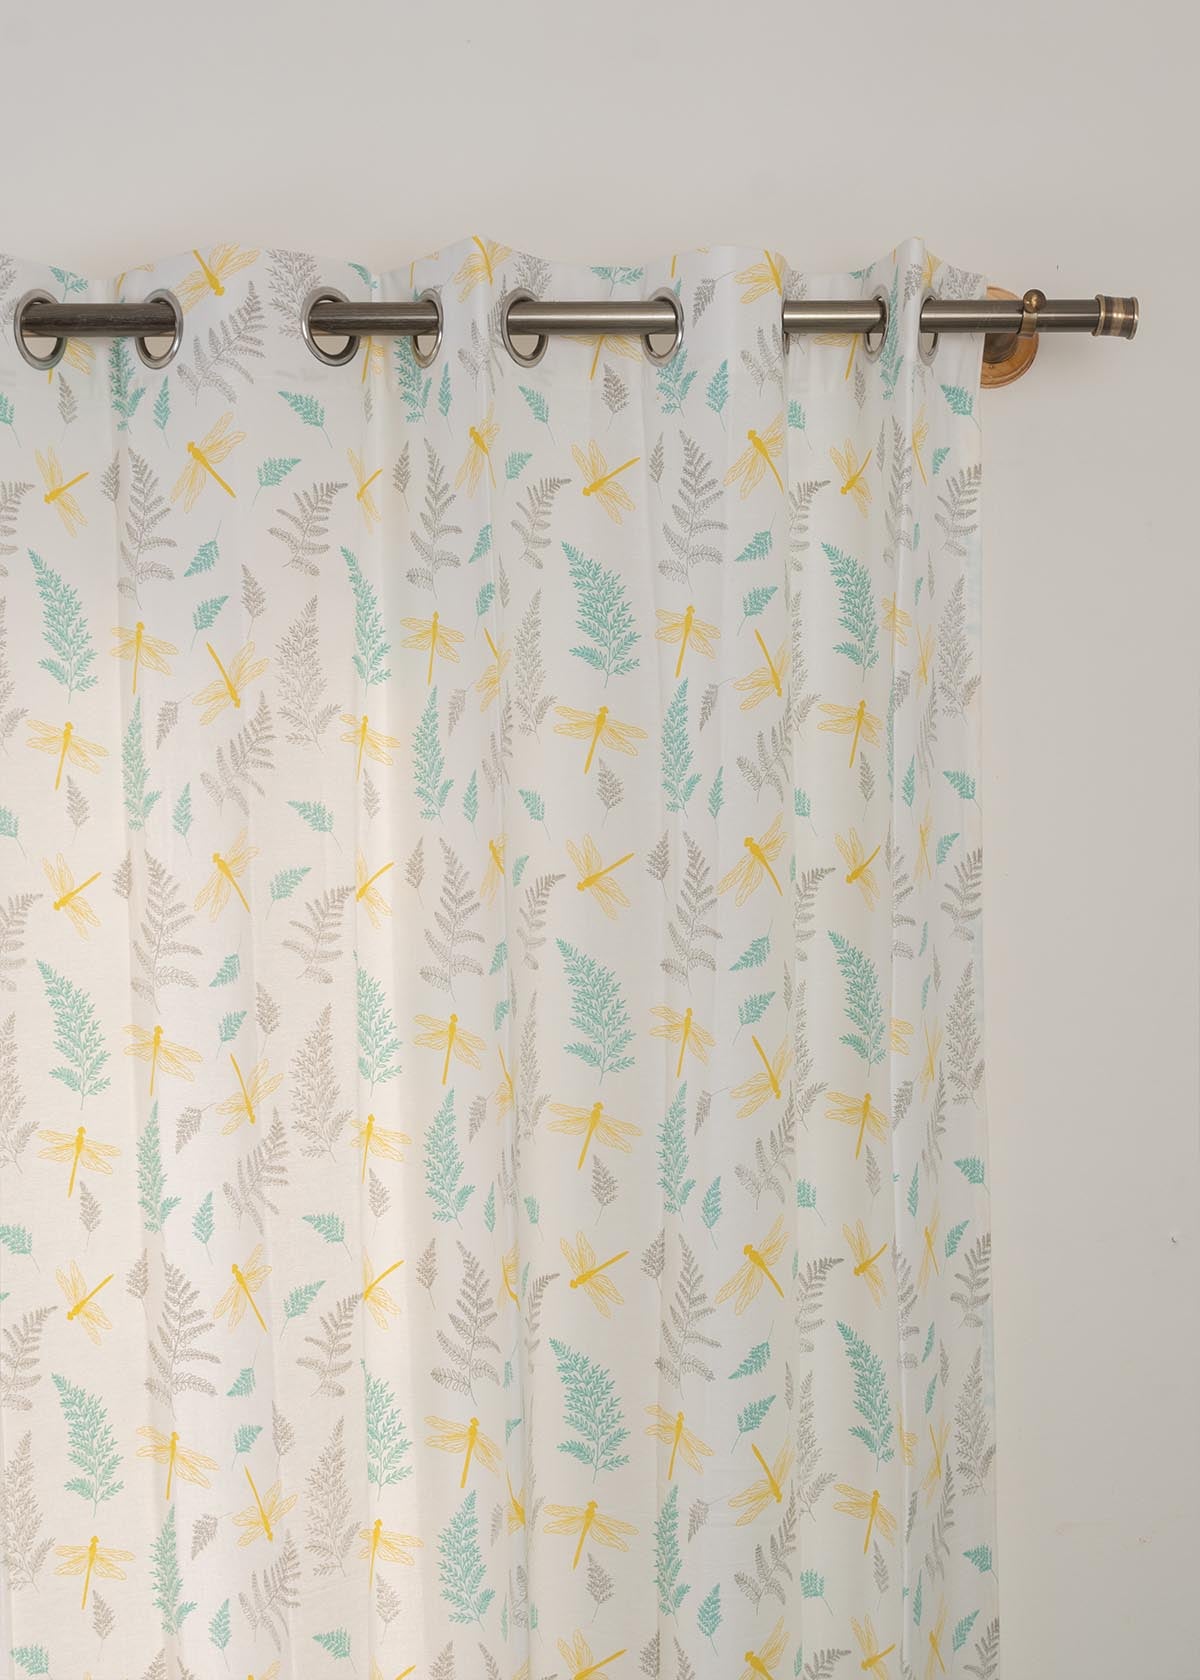 Winged Skies 100% Customizable Cotton floral curtain for kids room, living room & bed room - Room darkening - Yellow